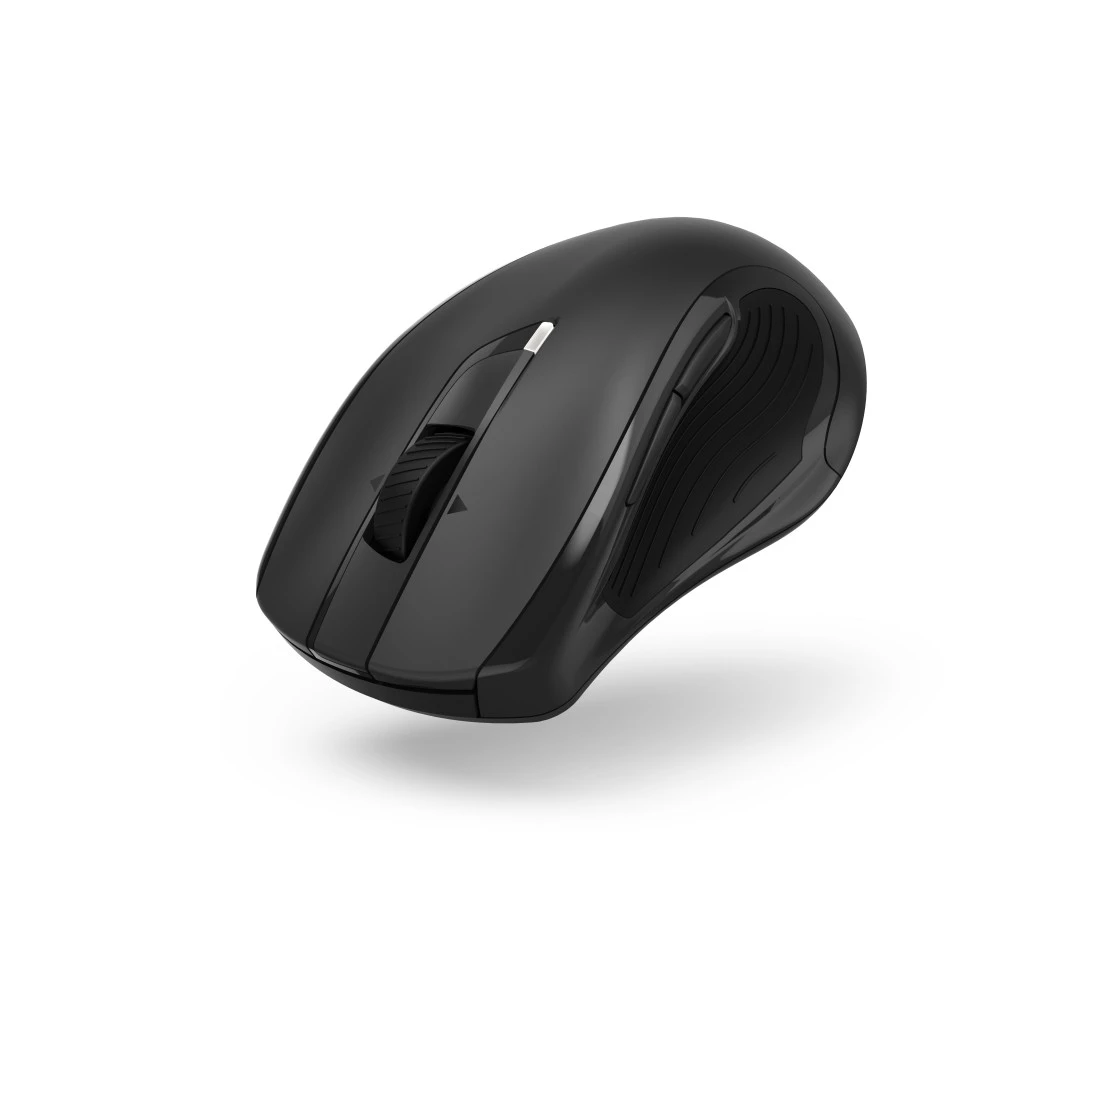 You Recently Viewed Hama 00173010 MW-800 7-Button Laser Wireless Mouse, black Image